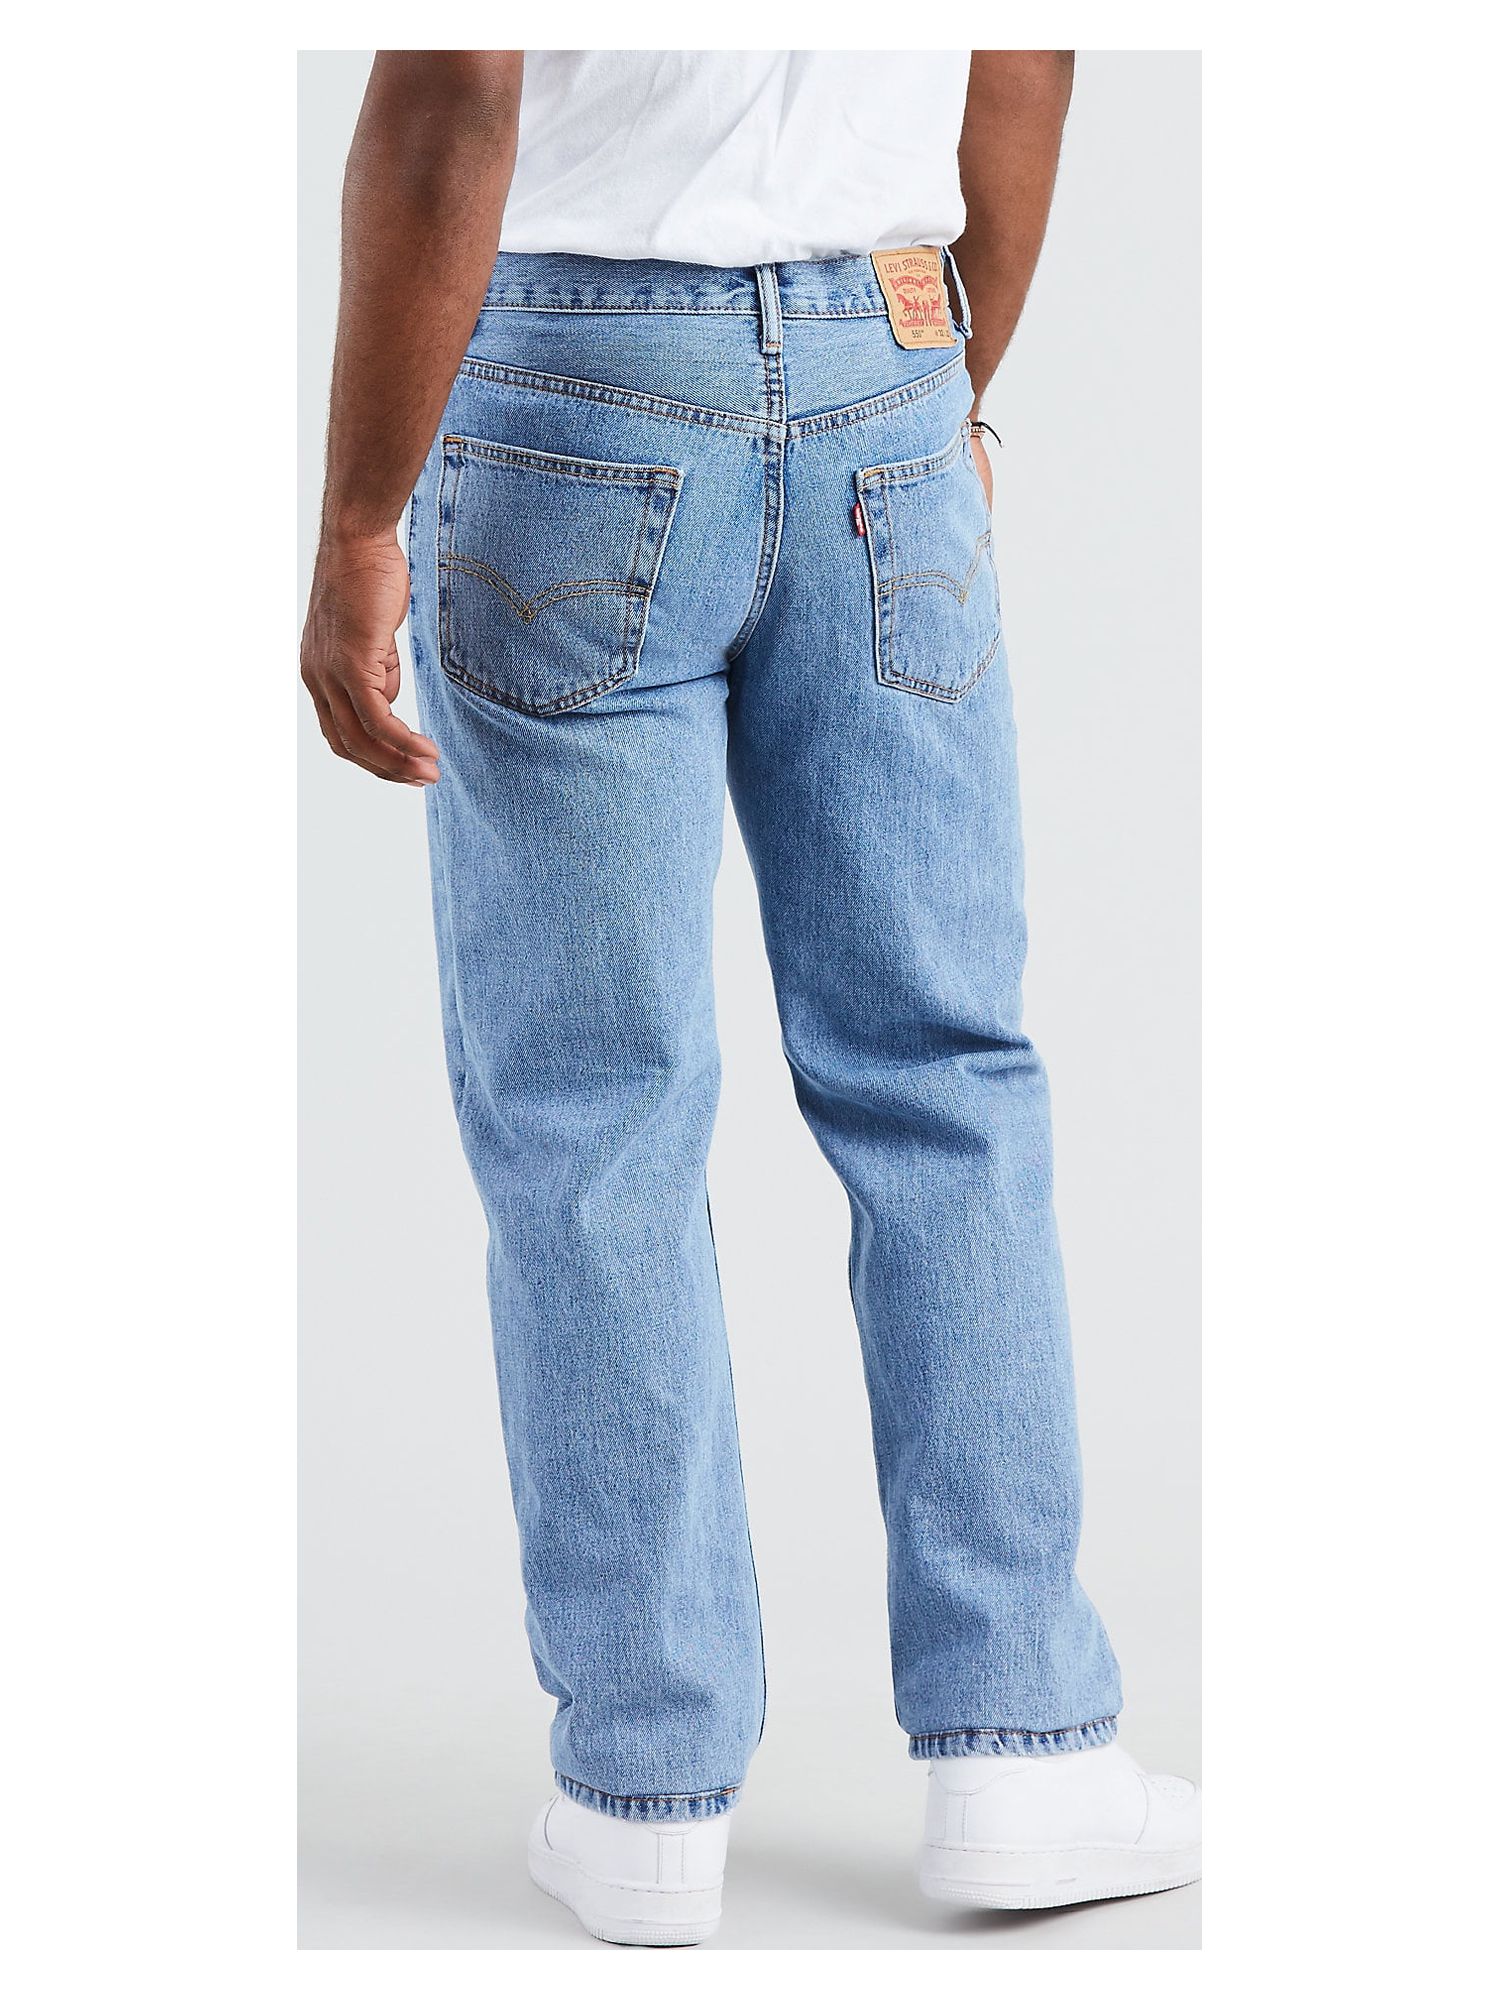 Levi's Men's 550 Relaxed Fit Jeans - image 5 of 7